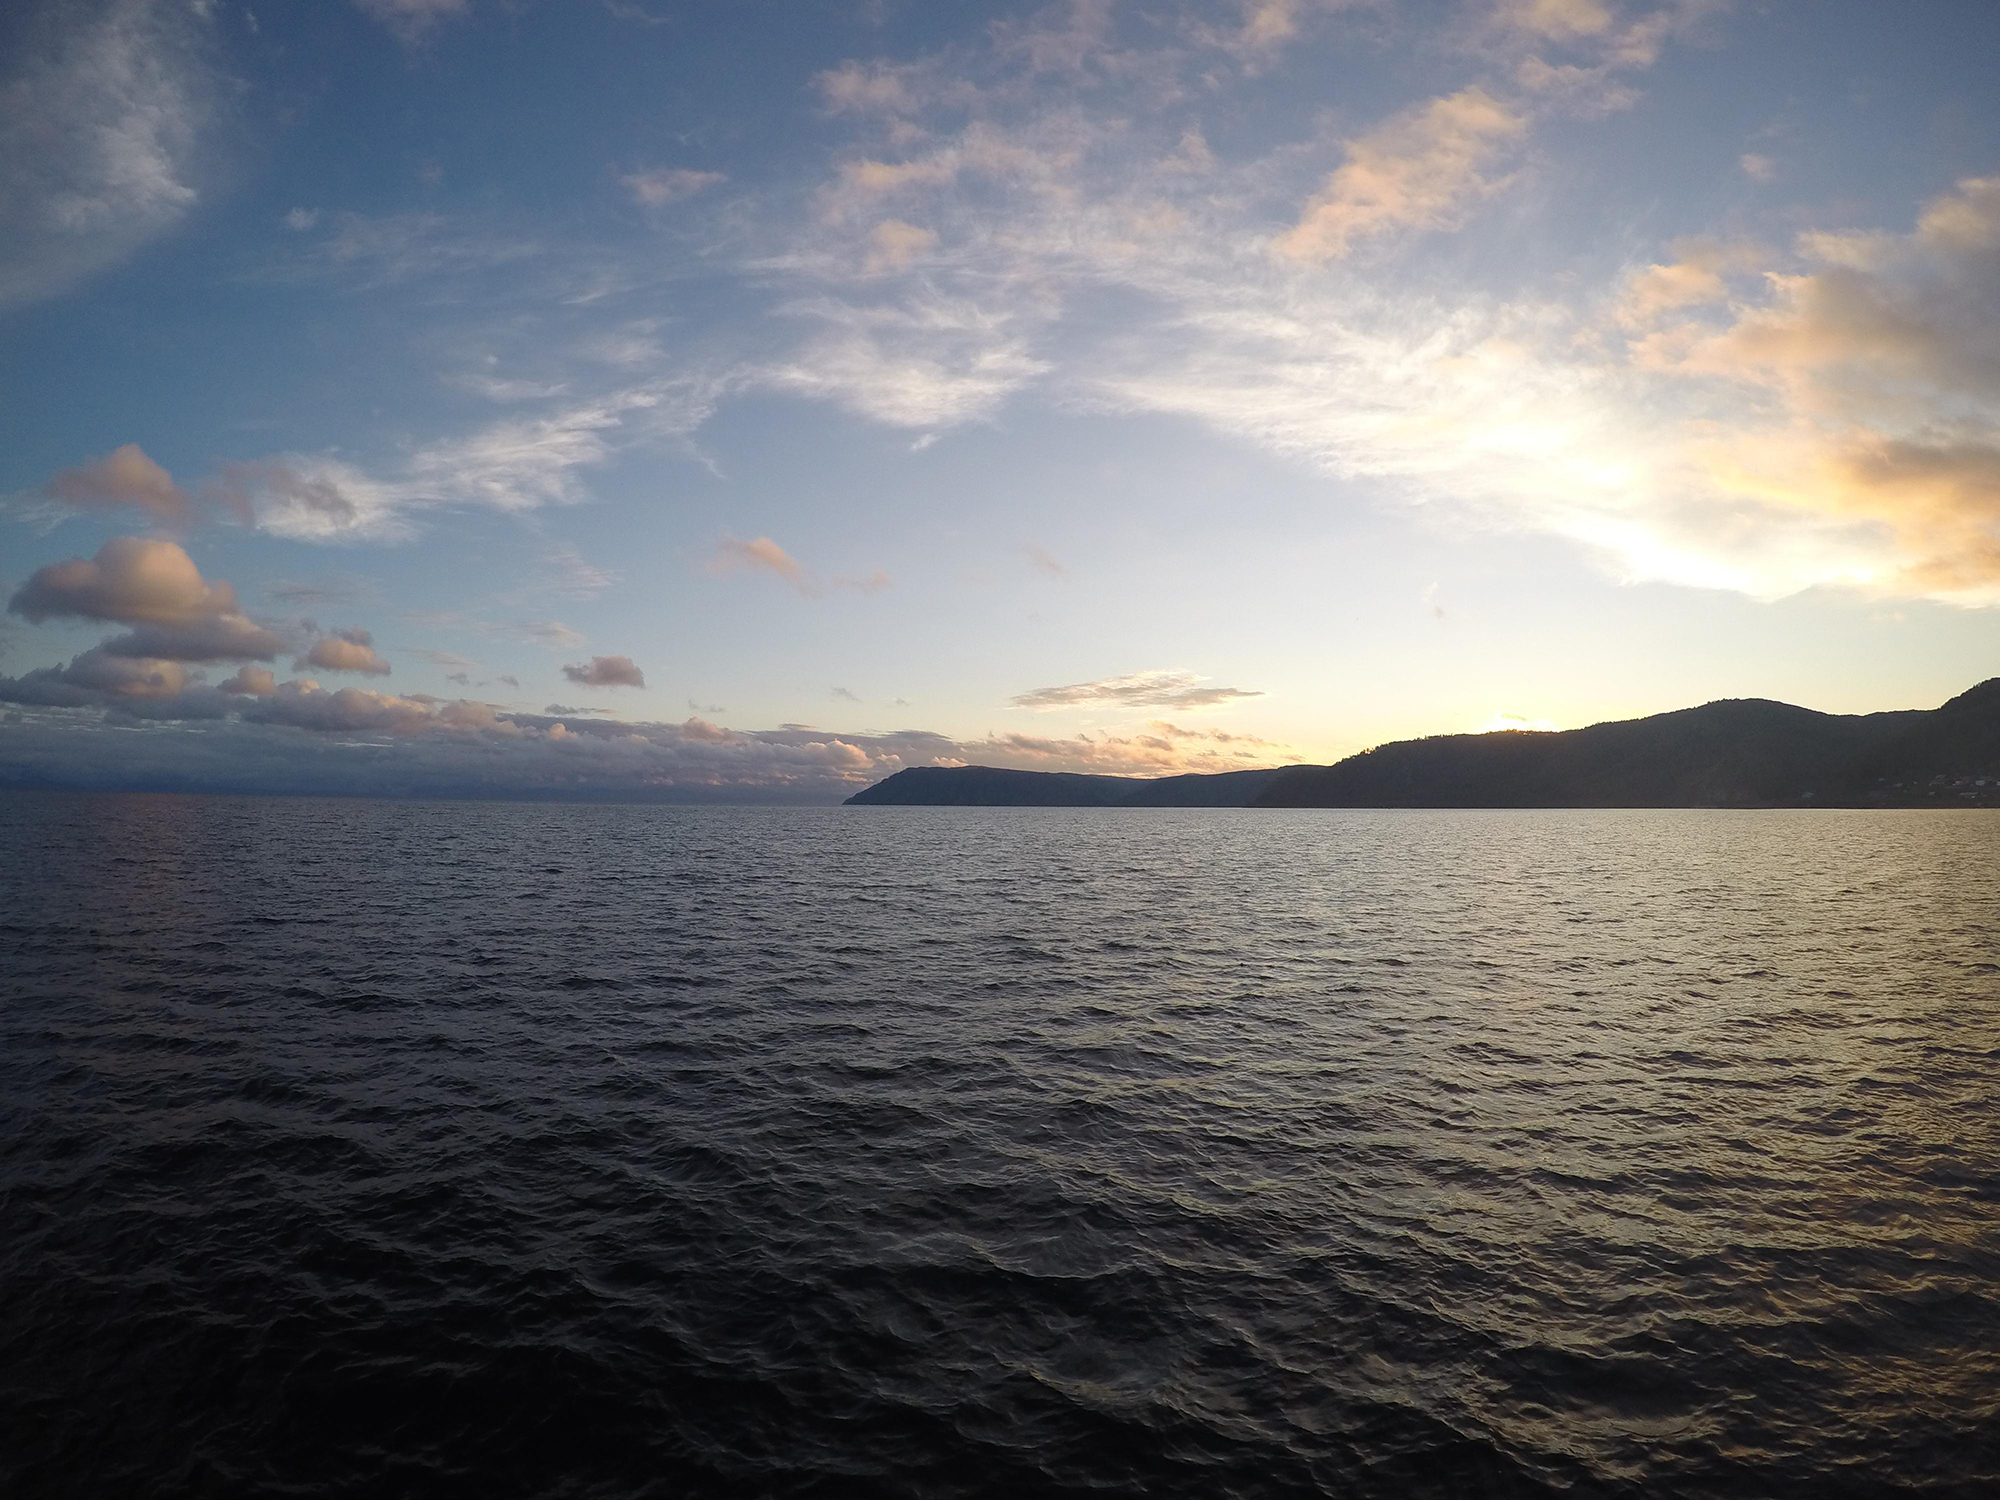 Lake Baikal. Picture by Bailey Wolff